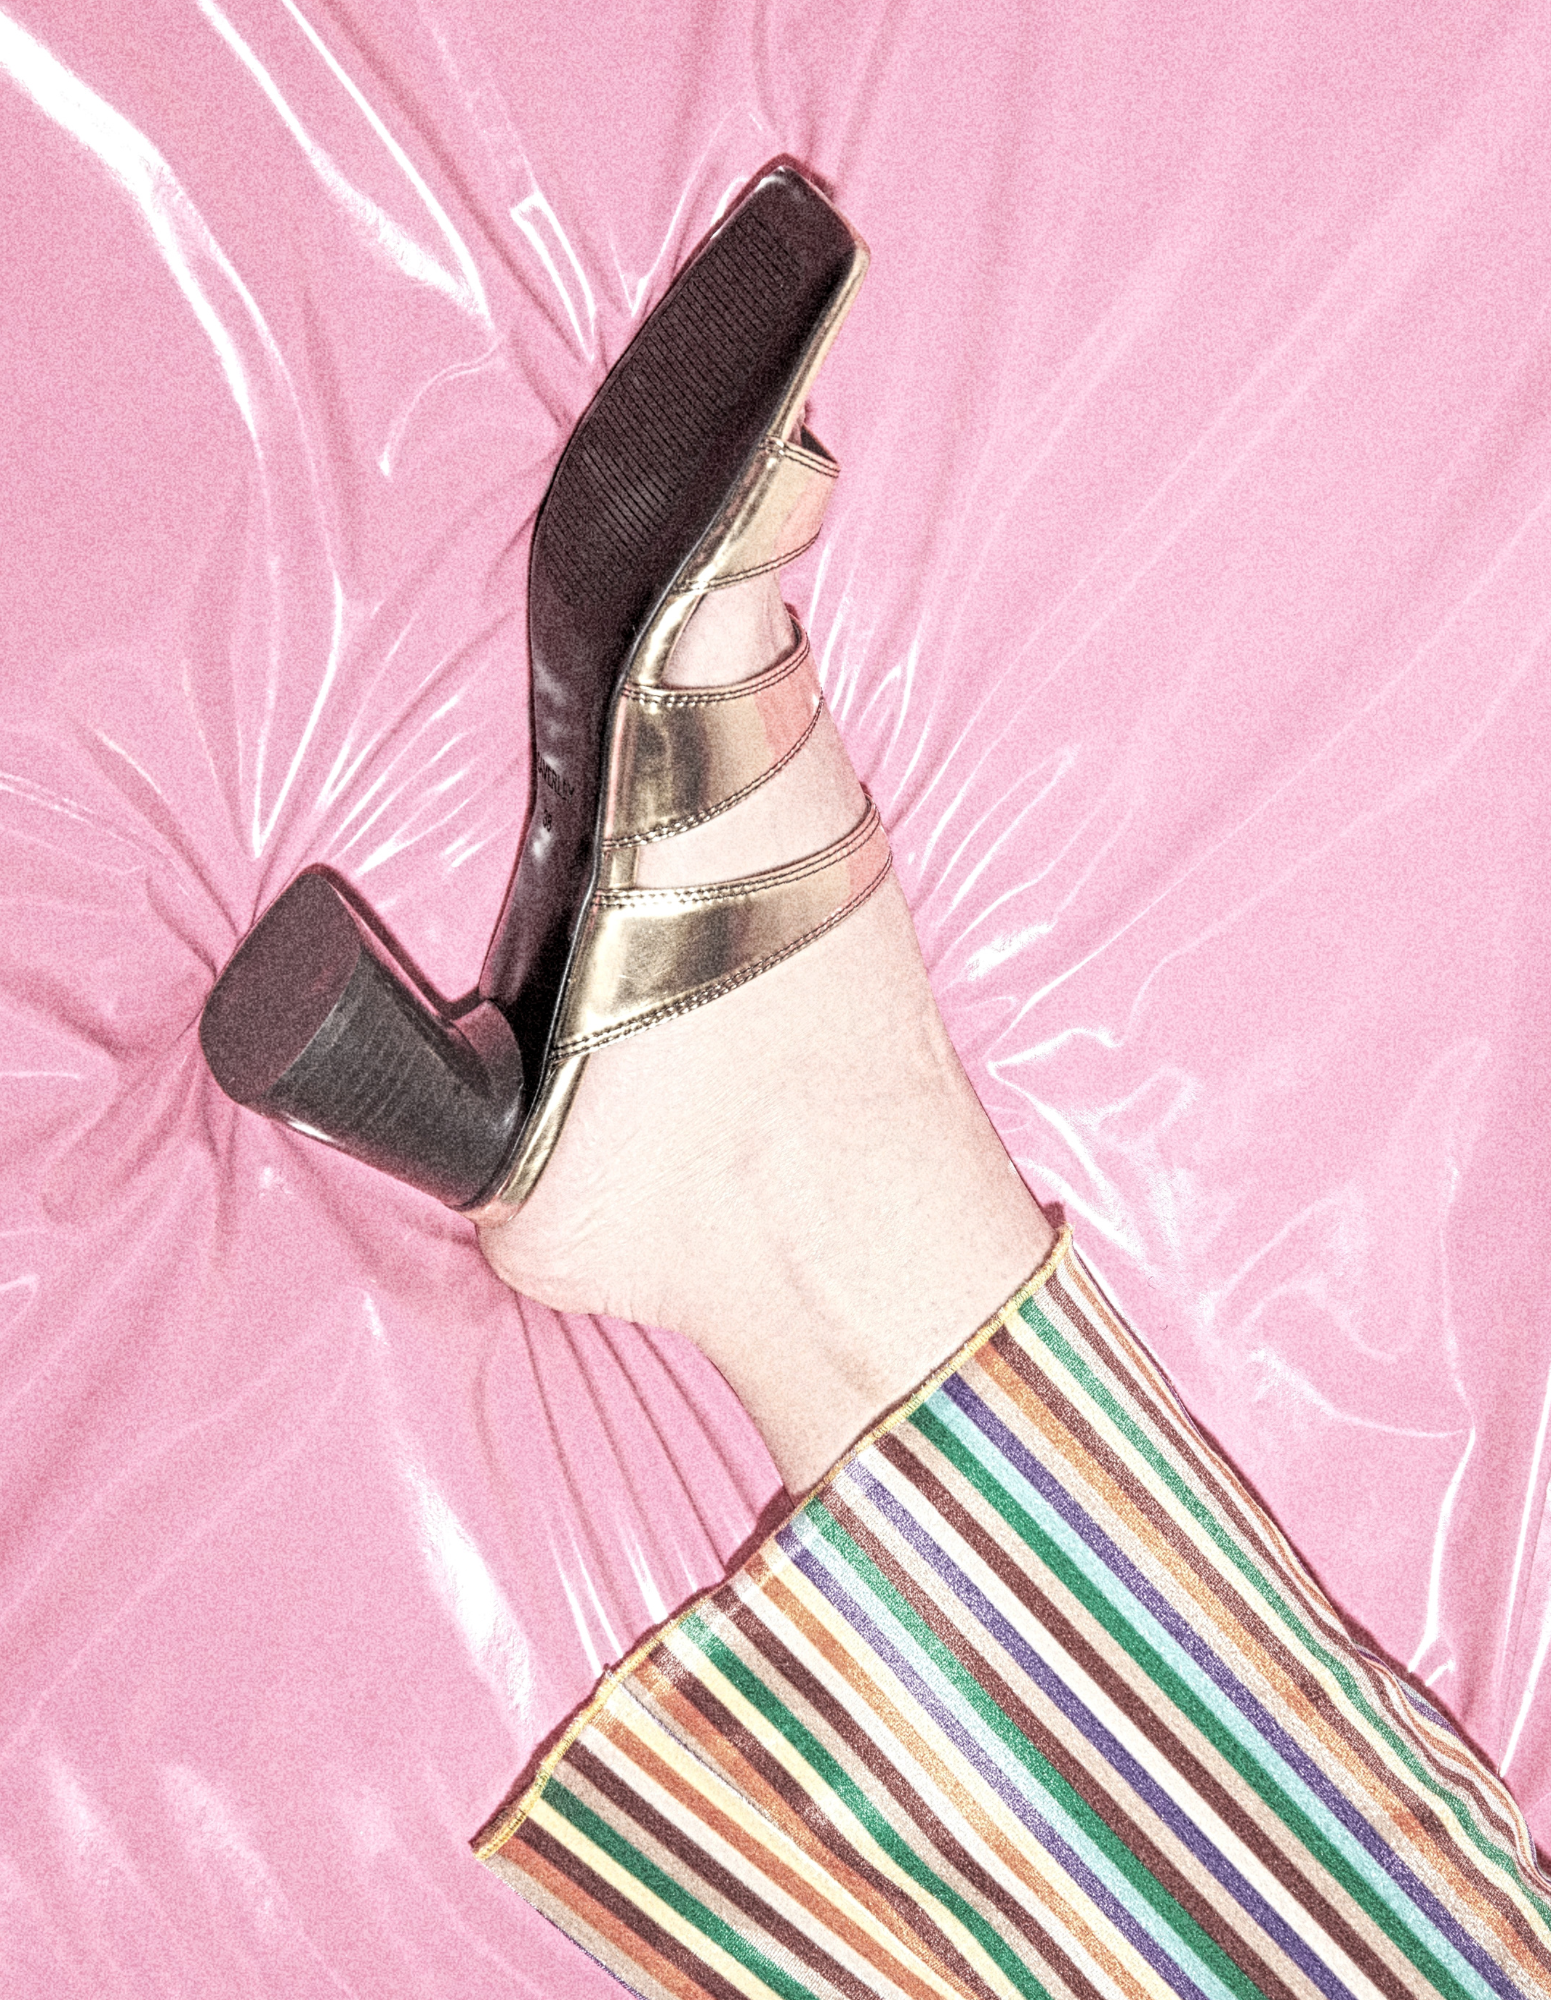 Parallel Culture Shoes and Fashion Online HEELS CAVERLEY DELFI MULE GOLD